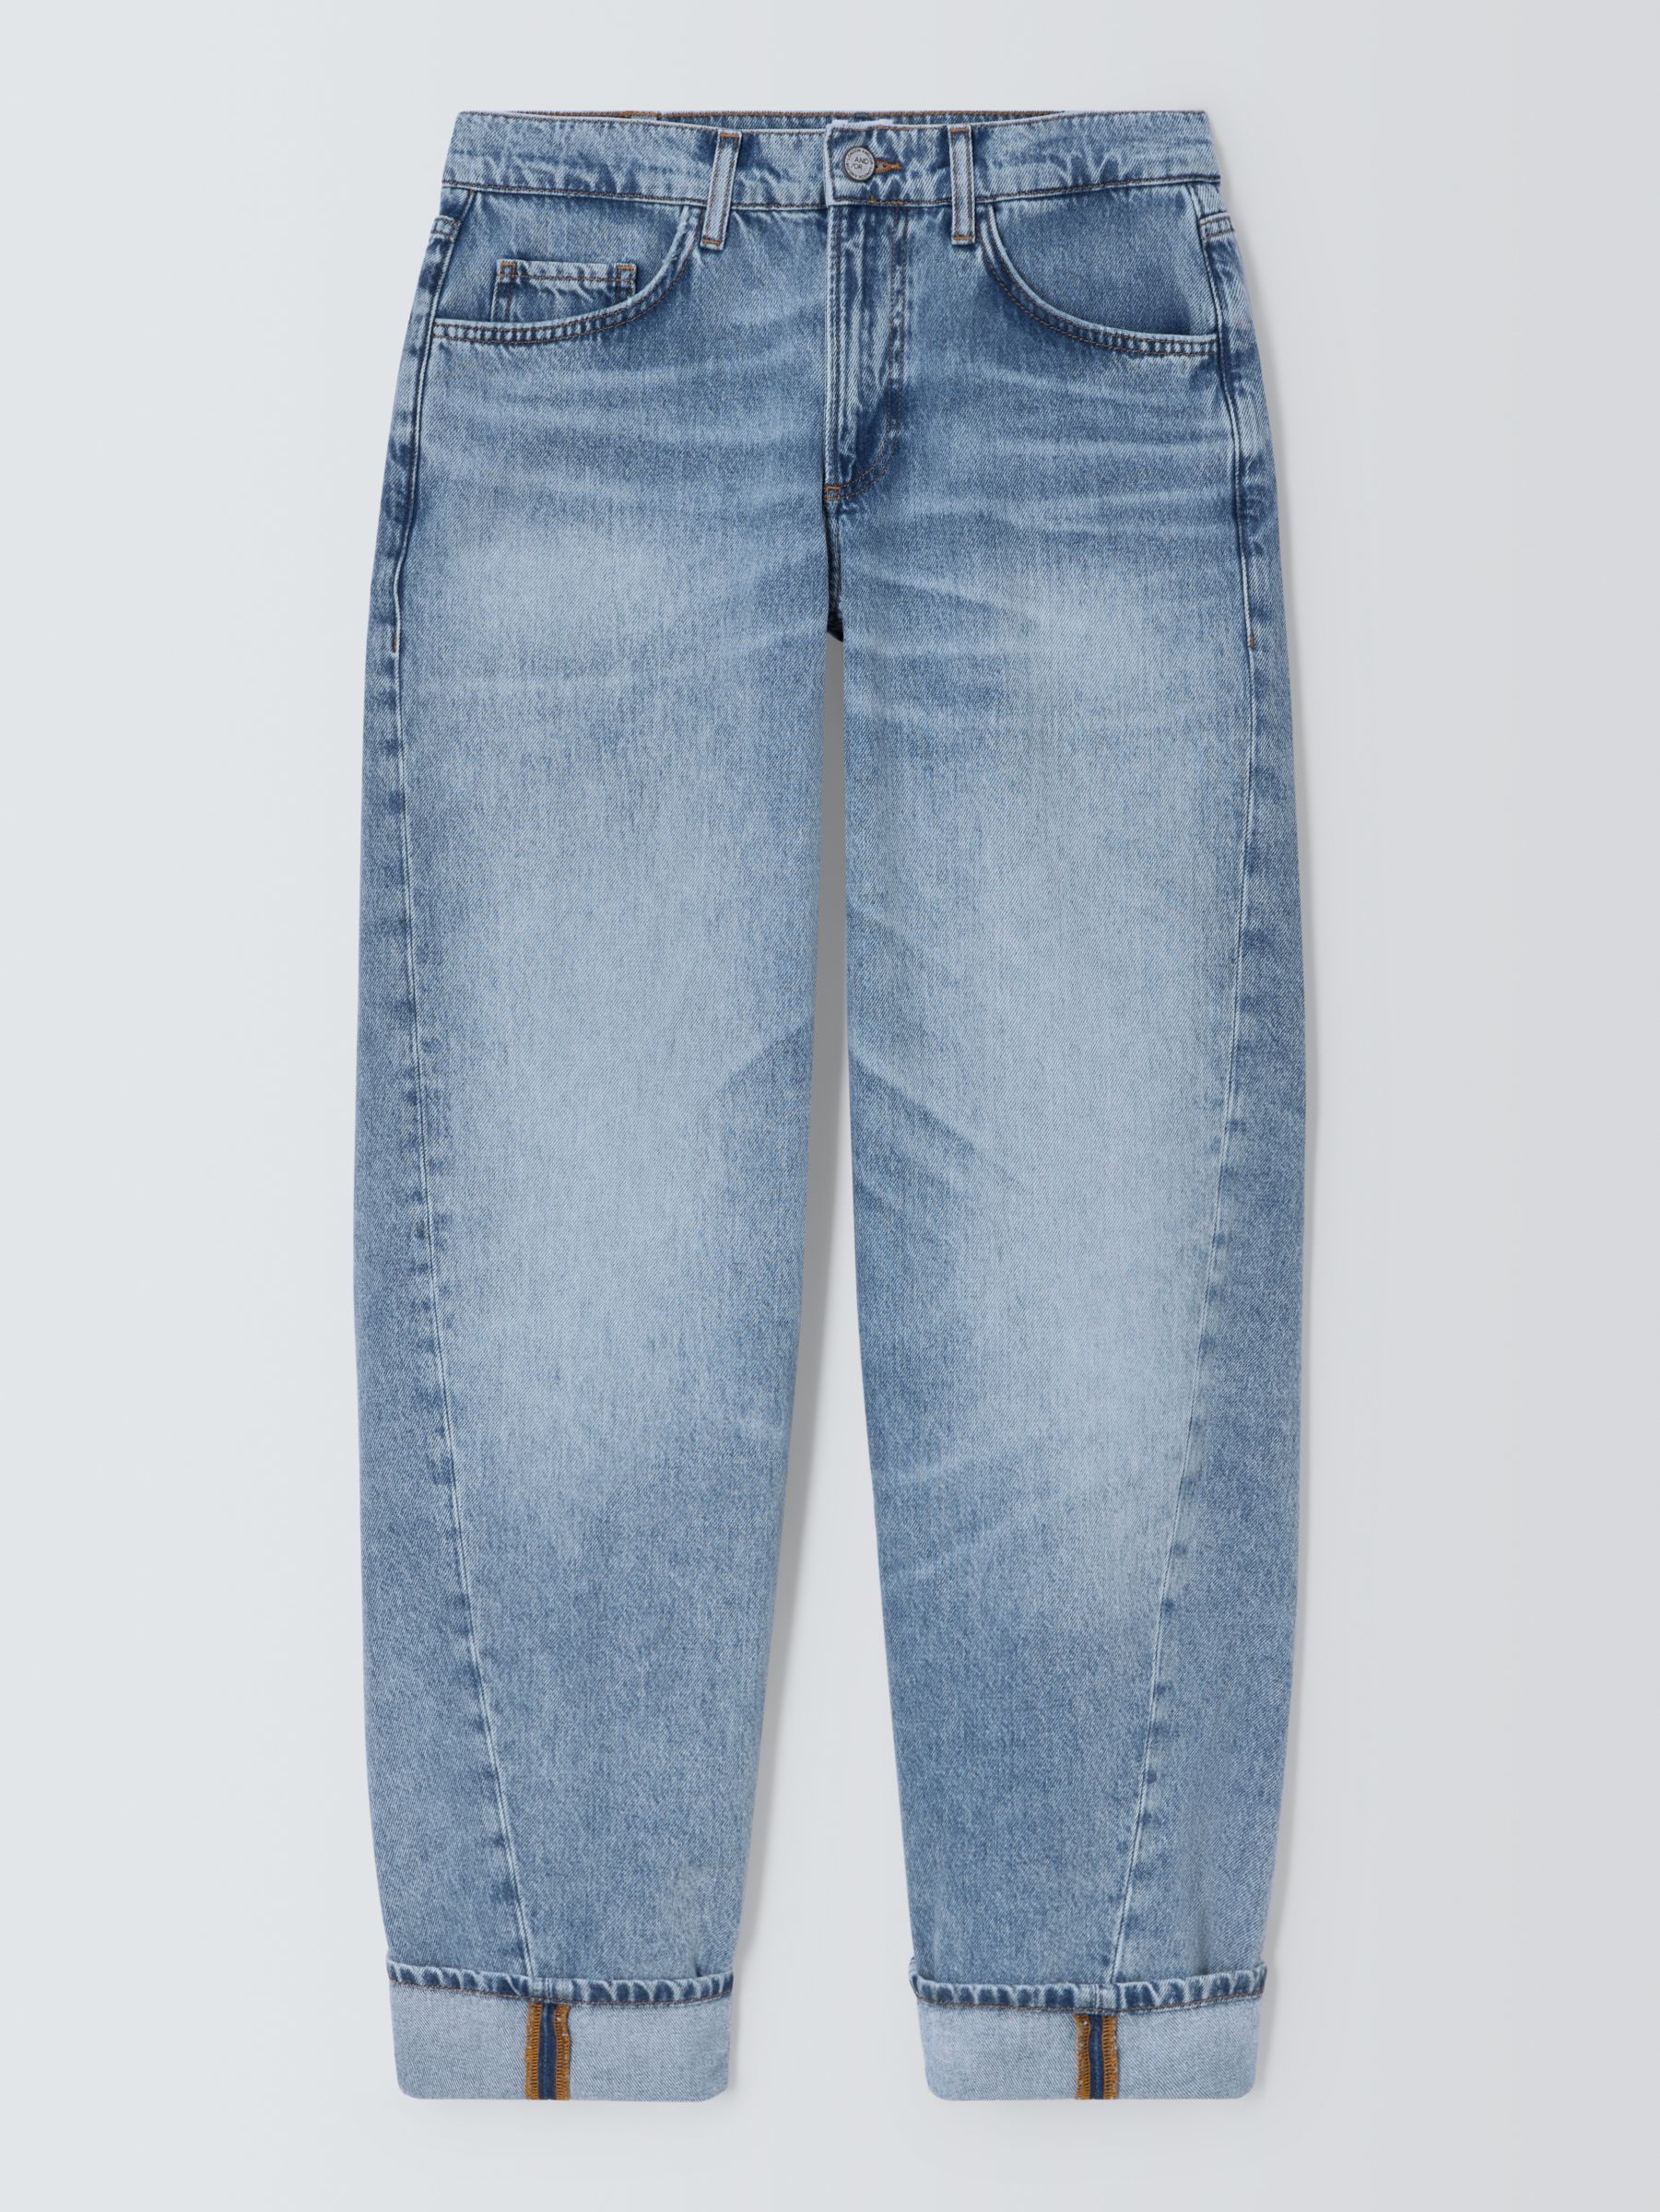 AND/OR Compton Barrel Leg Jeans, Light Blue, 26R